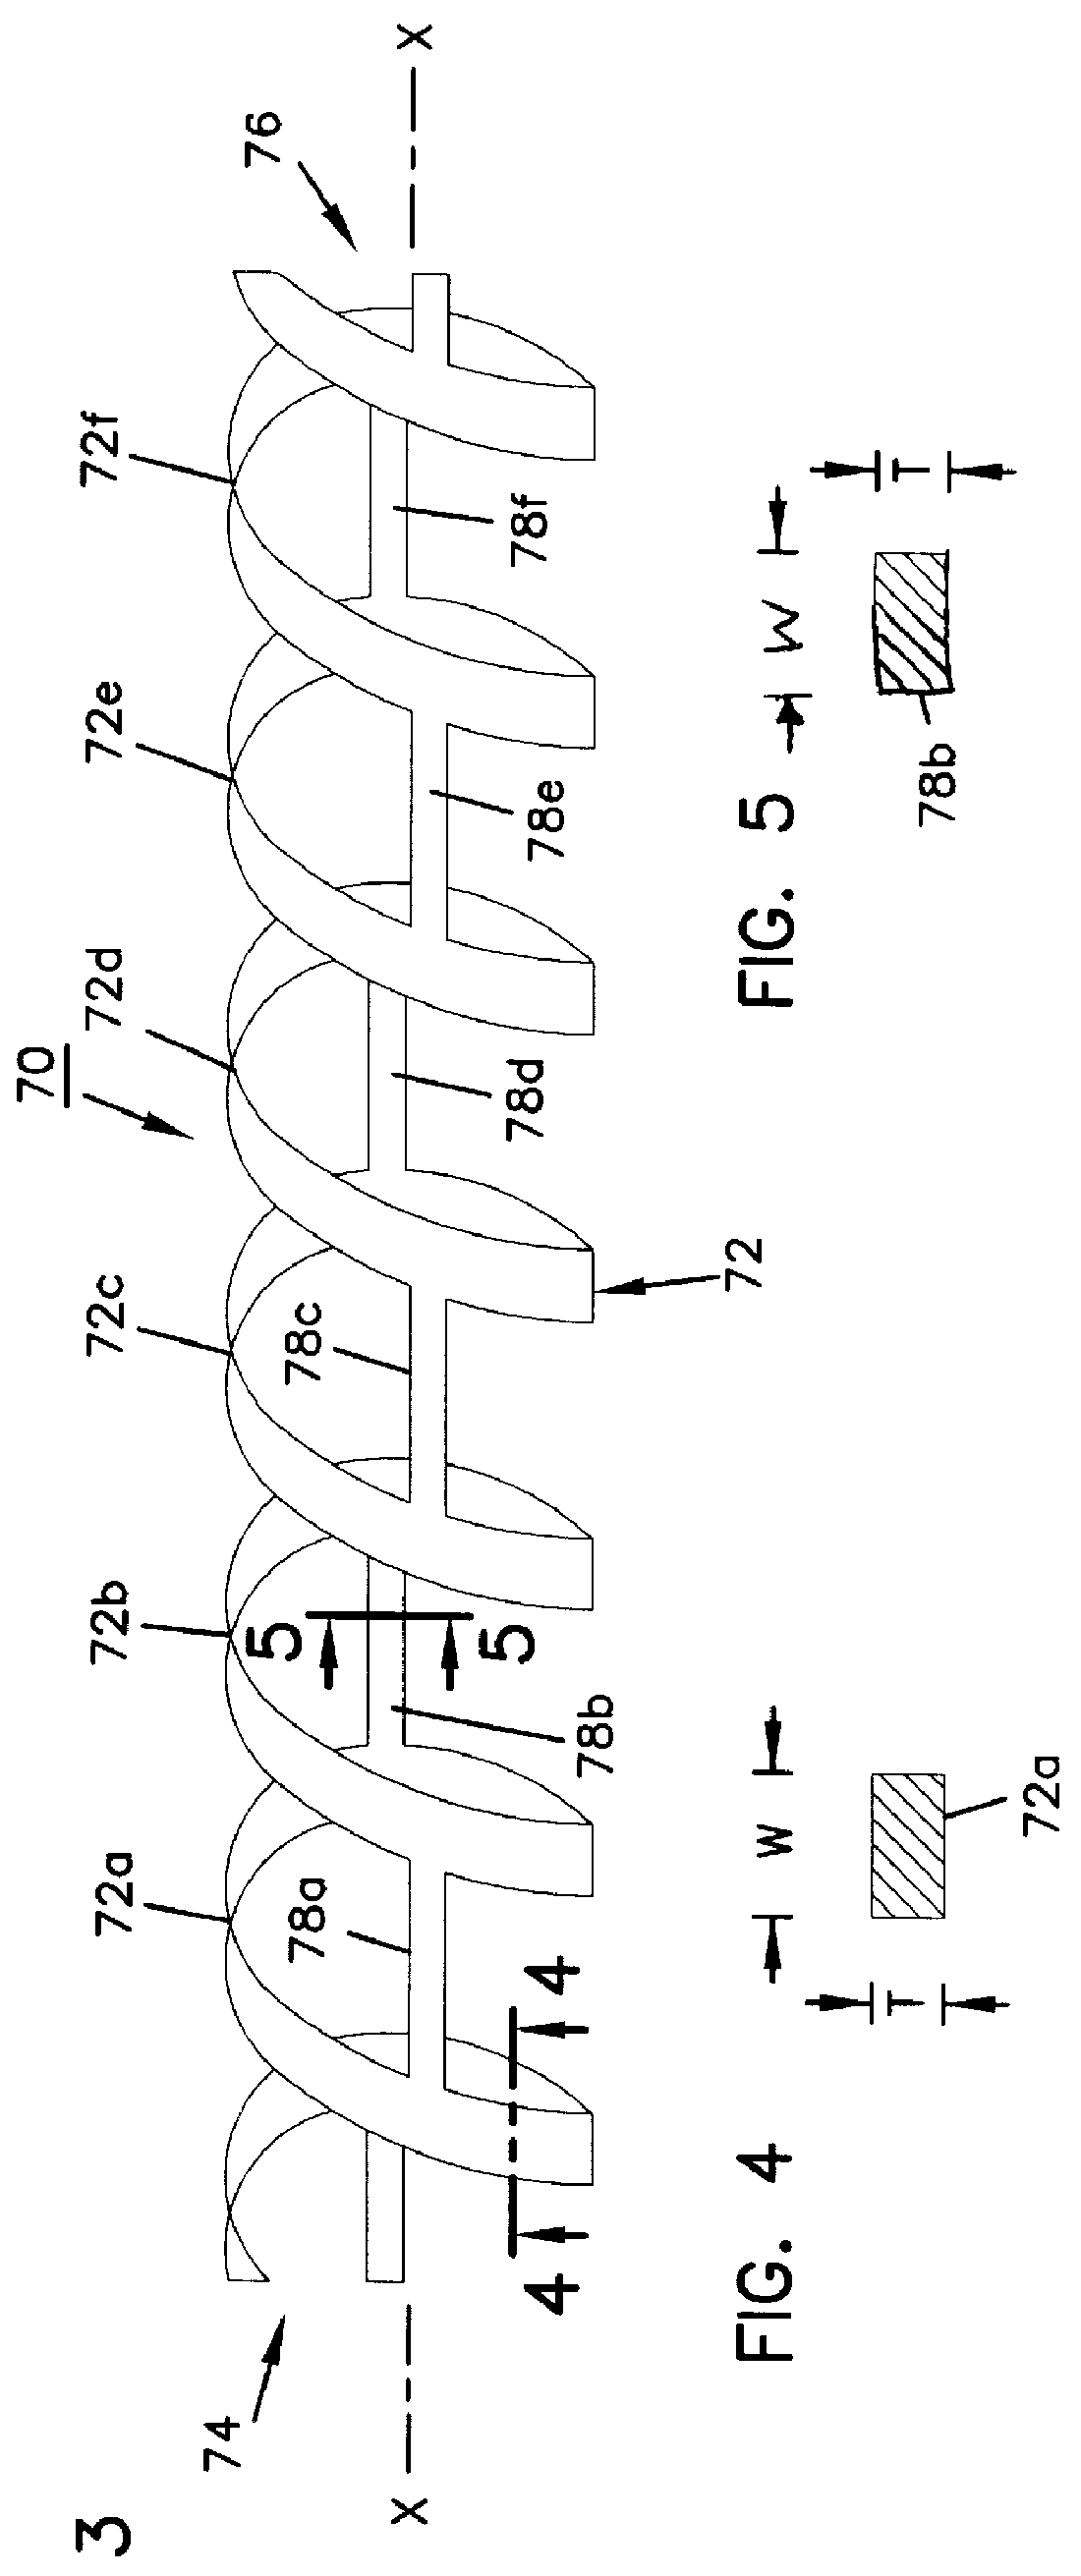 Bridged coil catheter support structure